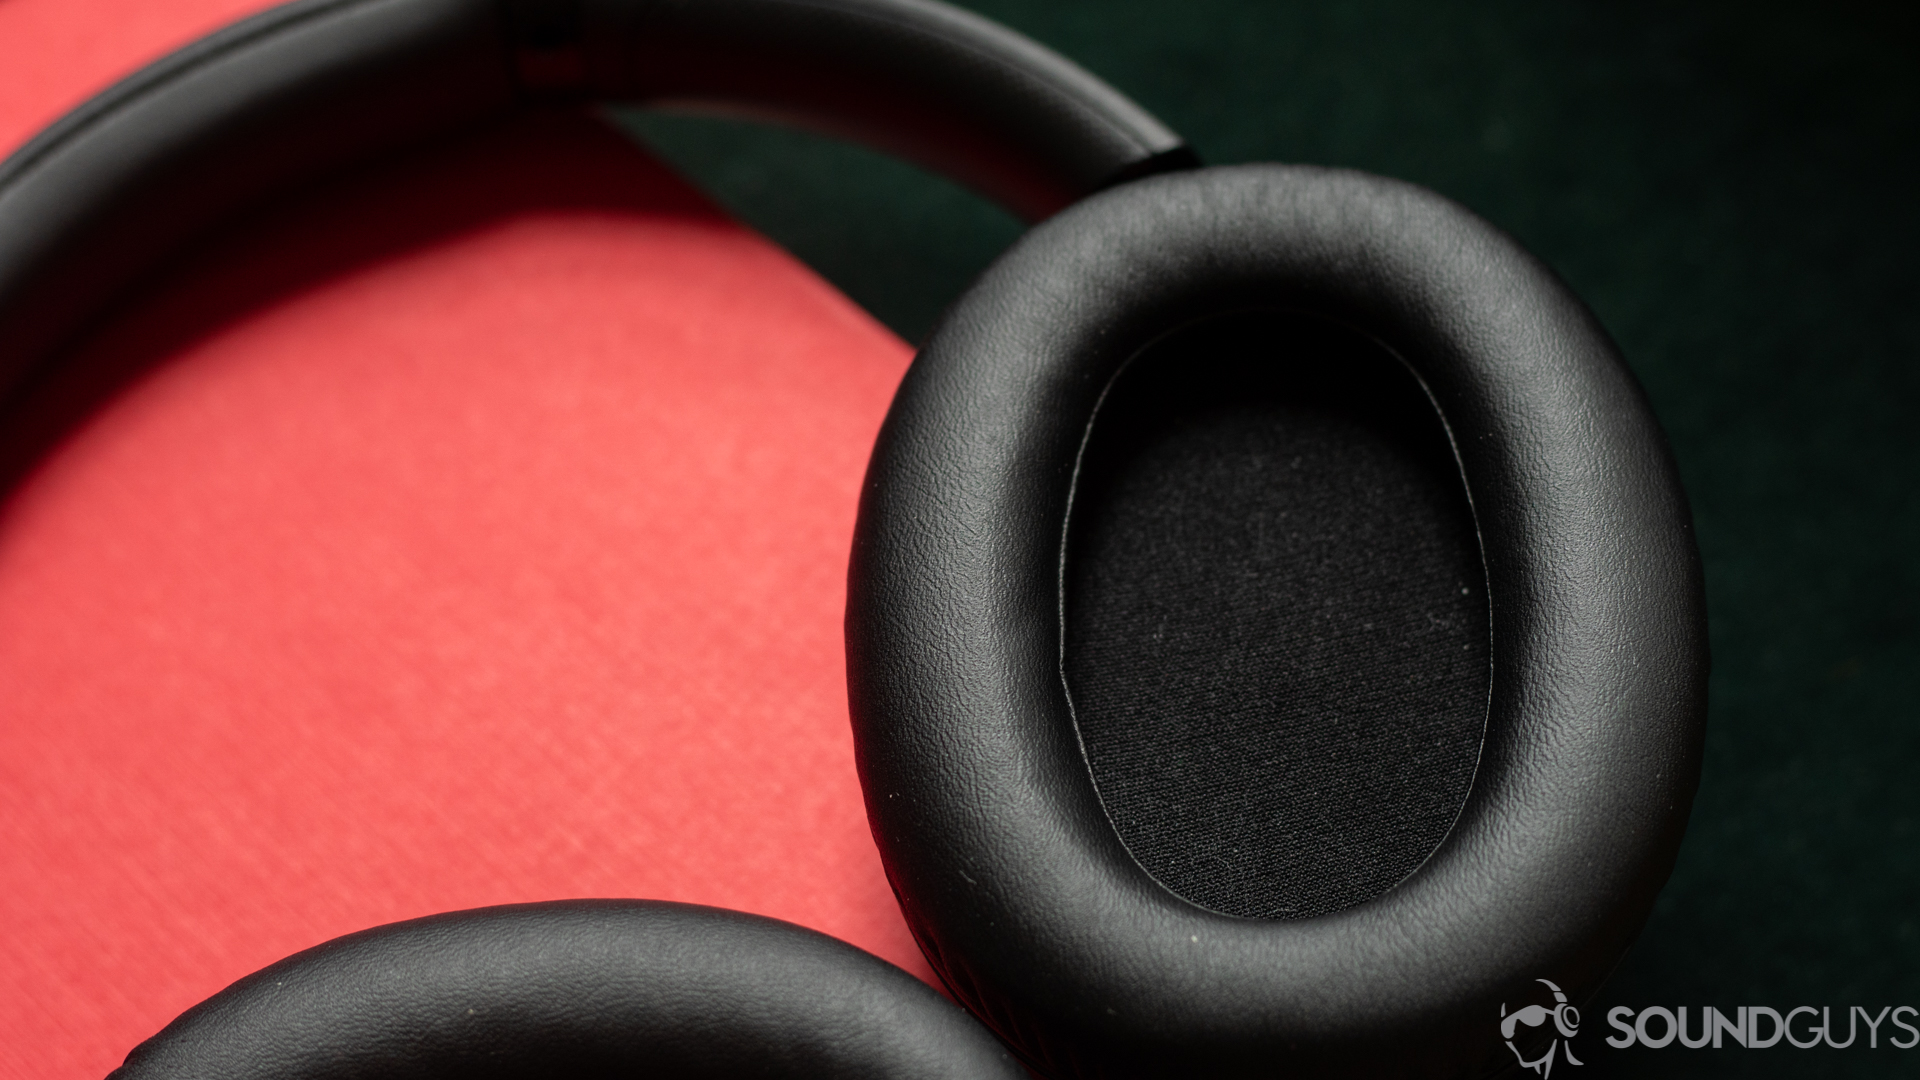 Close-up shot of the inside of the earcup for the Sony WH-CH710N on a red book